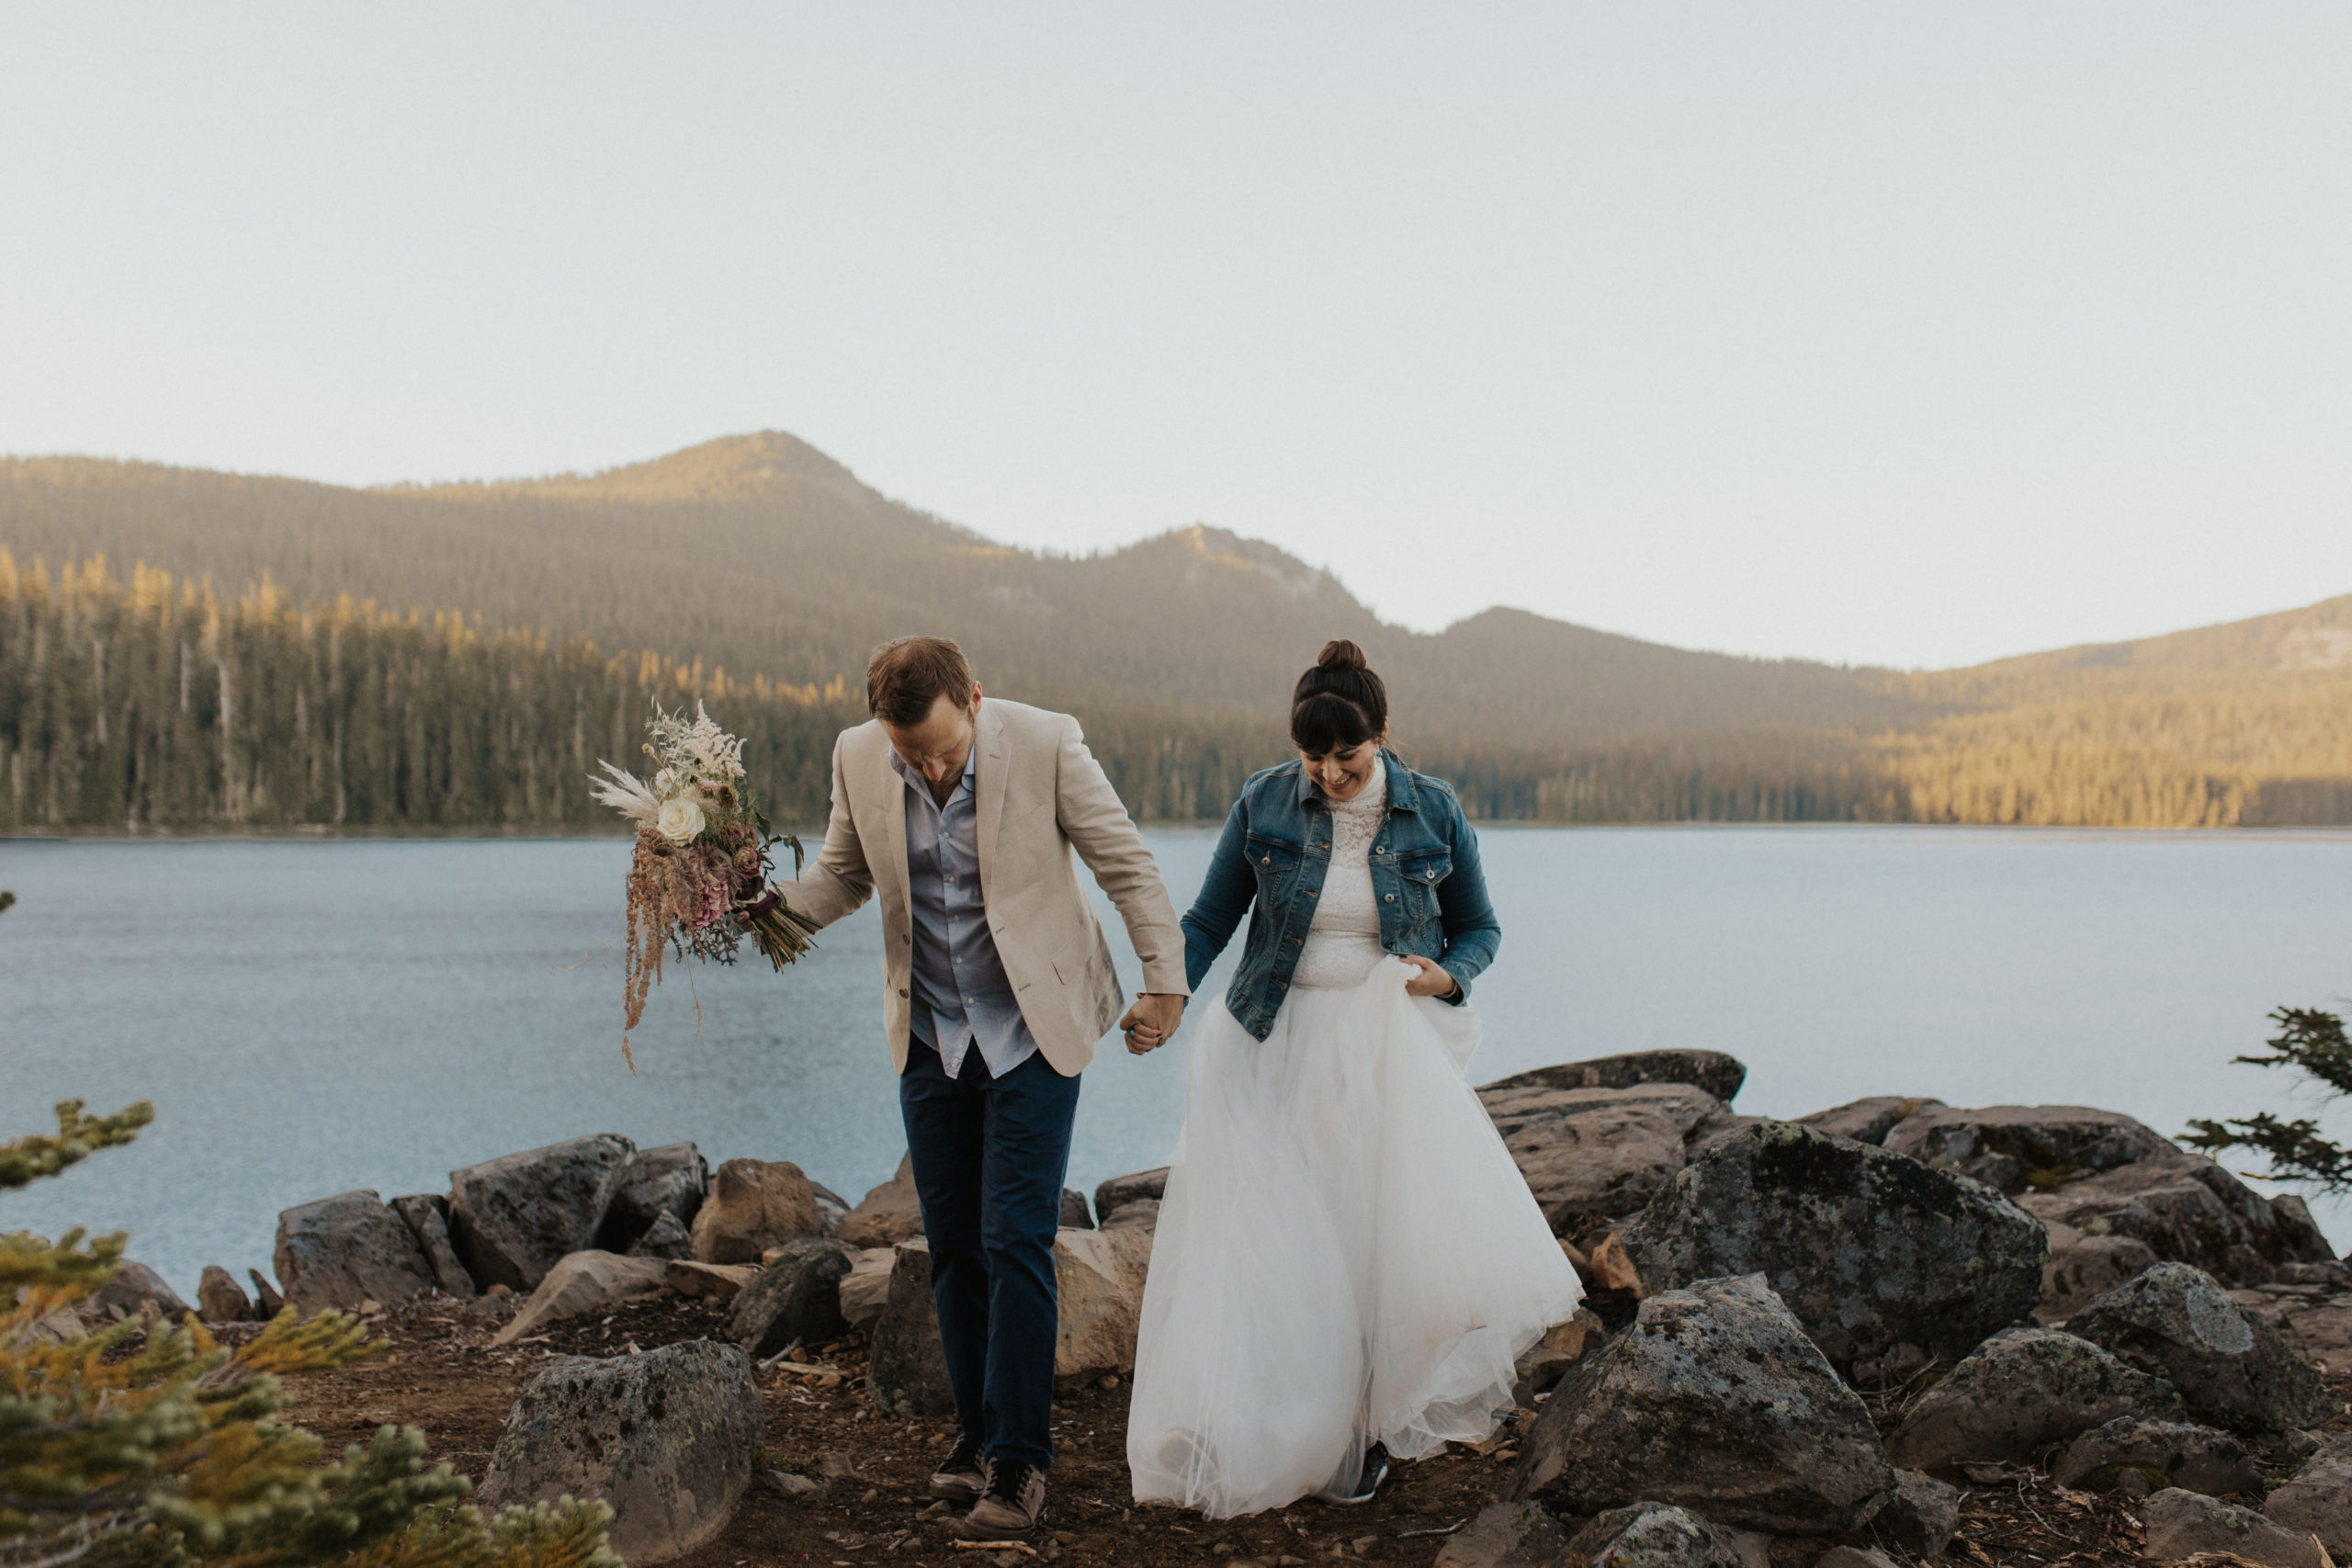 Brennan holds the bouquet while leading Zoraya along the lake shore at Waldo lake for their kayaking elopement